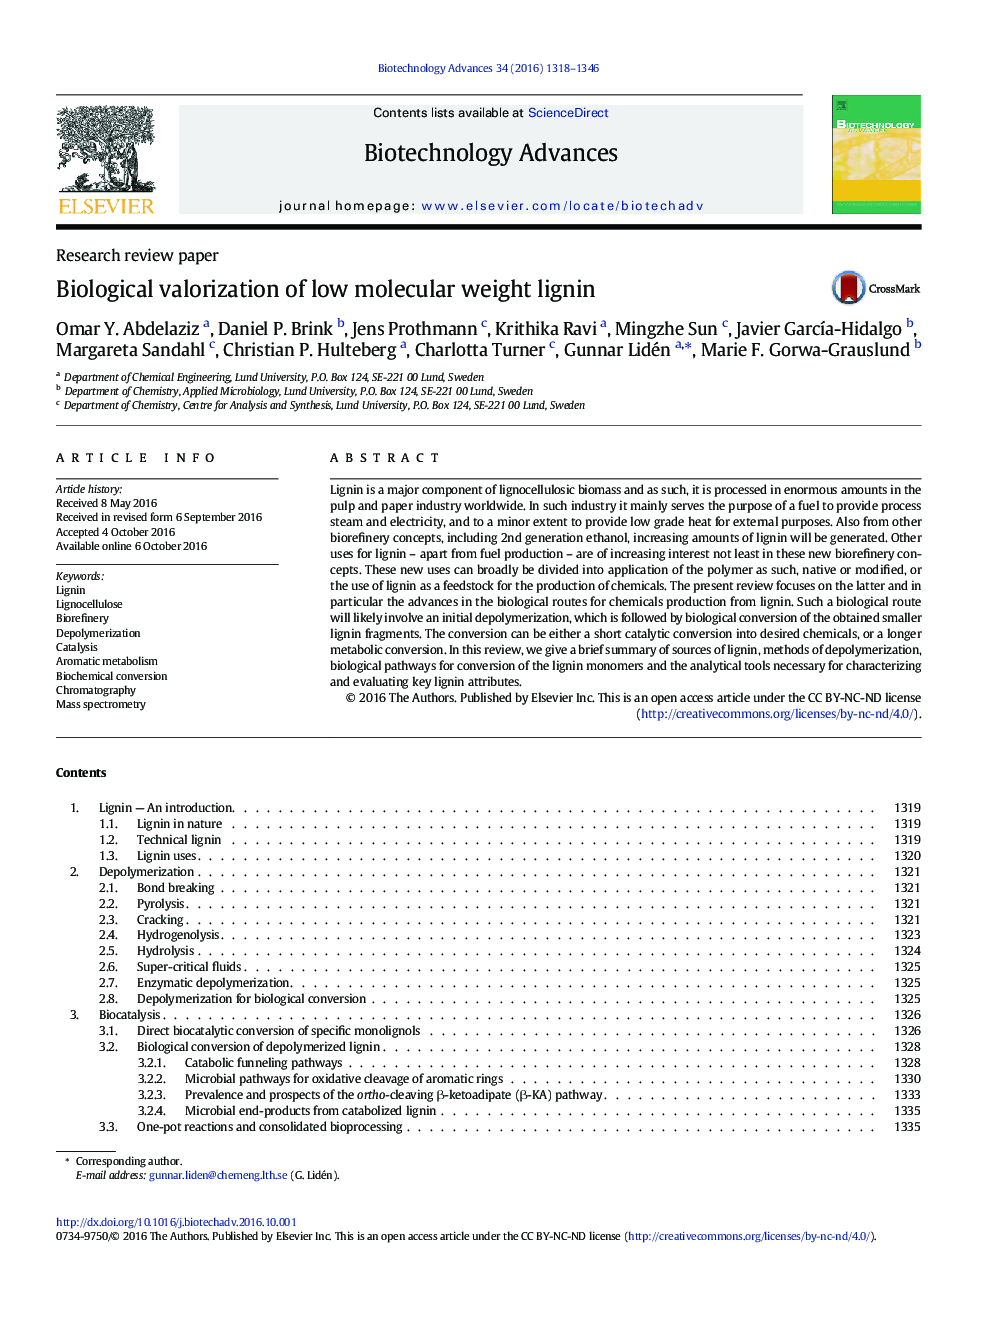 Research review paperBiological valorization of low molecular weight lignin